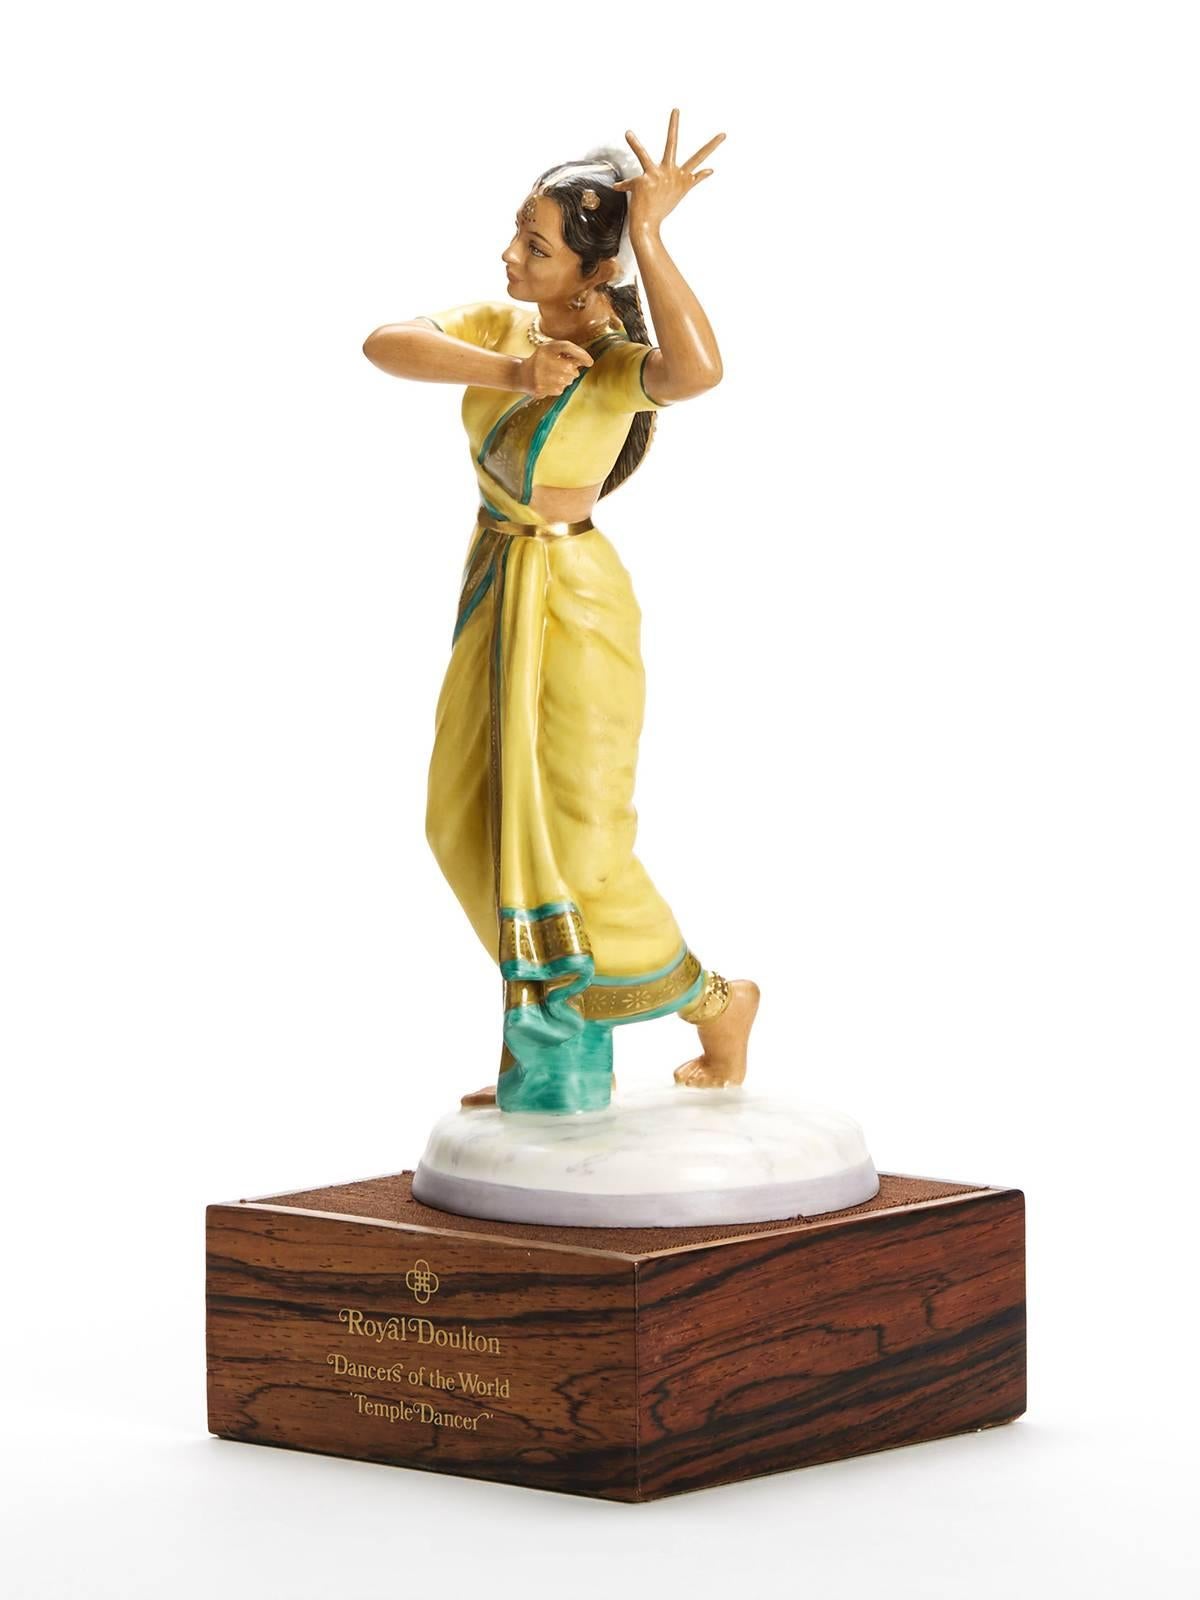 Hand-Painted Royal Doulton Indian Temple Dancer Figurine, 1976